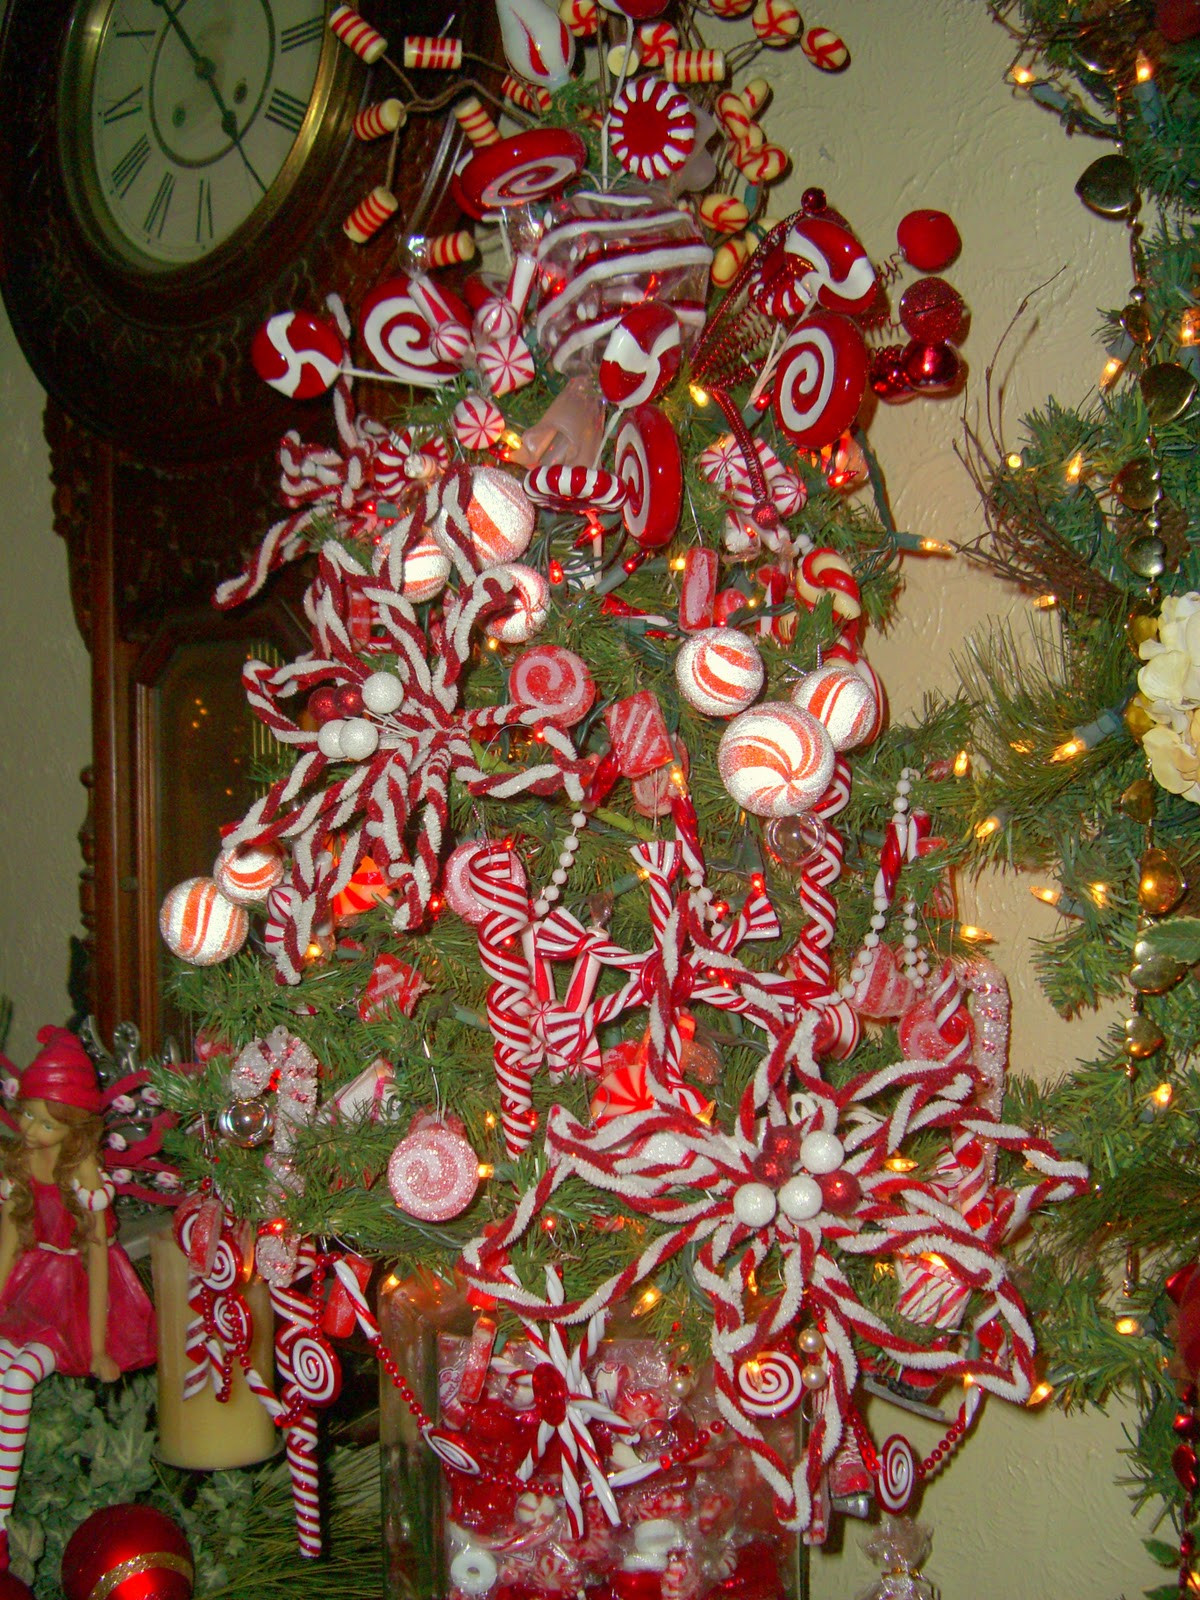 Peppermint Candy Christmas Tree
 House full of Christmas trees